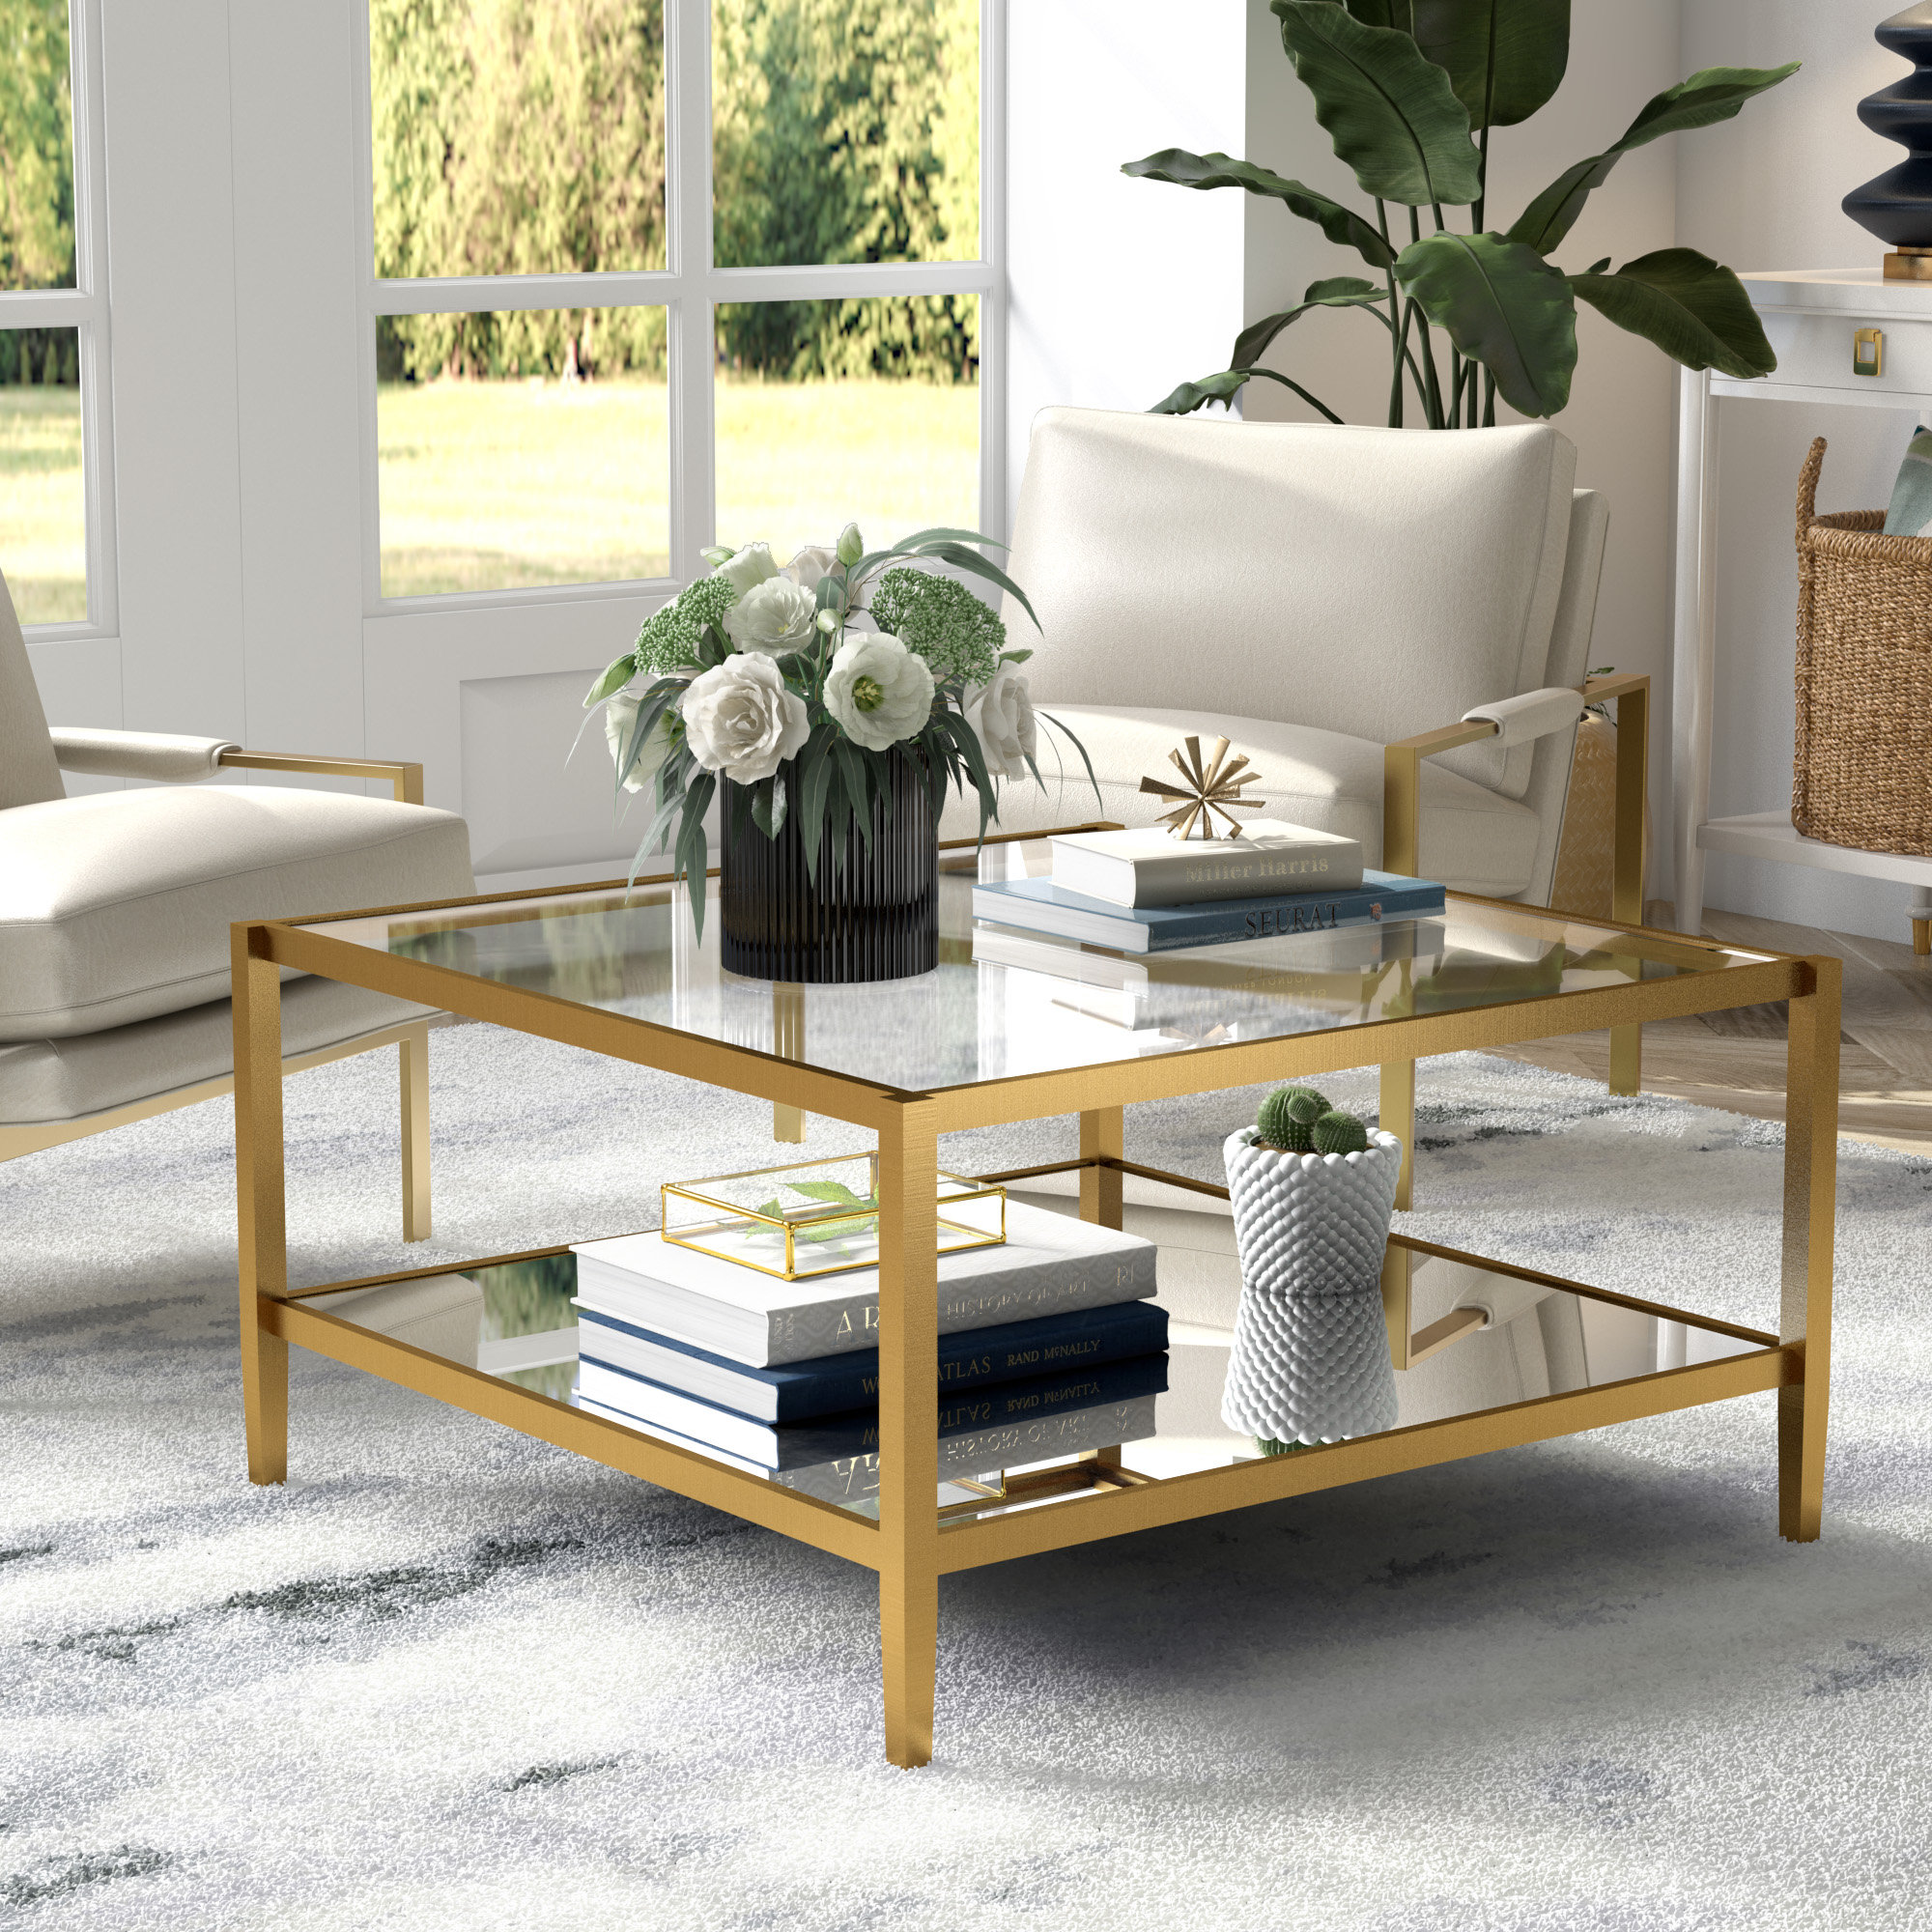 Anissa 4 Legs Coffee Table with Storage